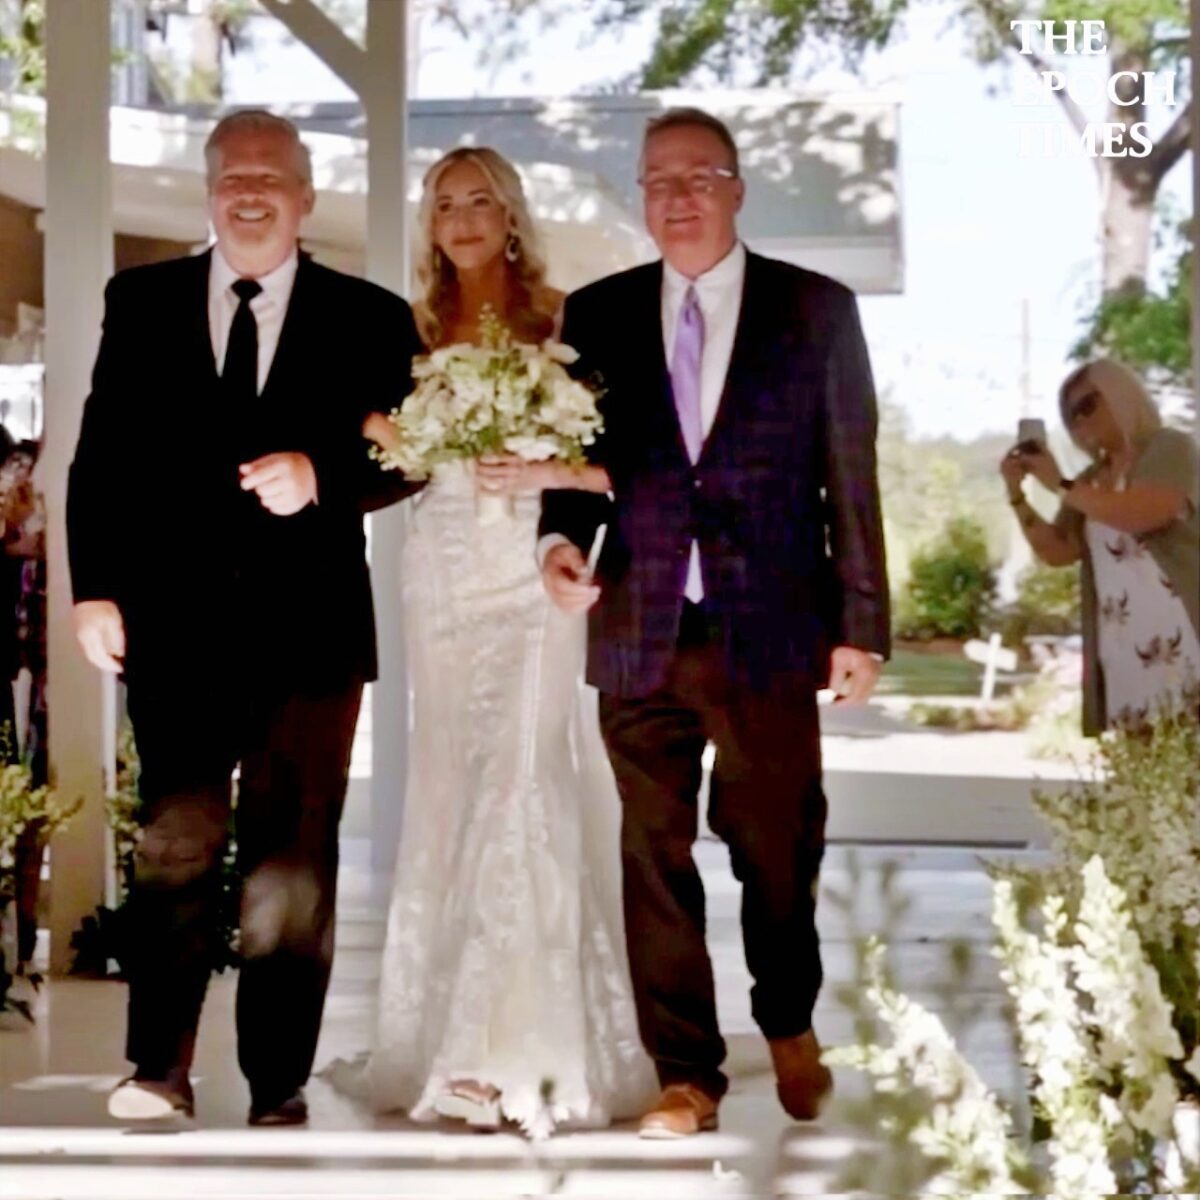 Brides Father Invites Stepdad To Walk Her Down The Aisle